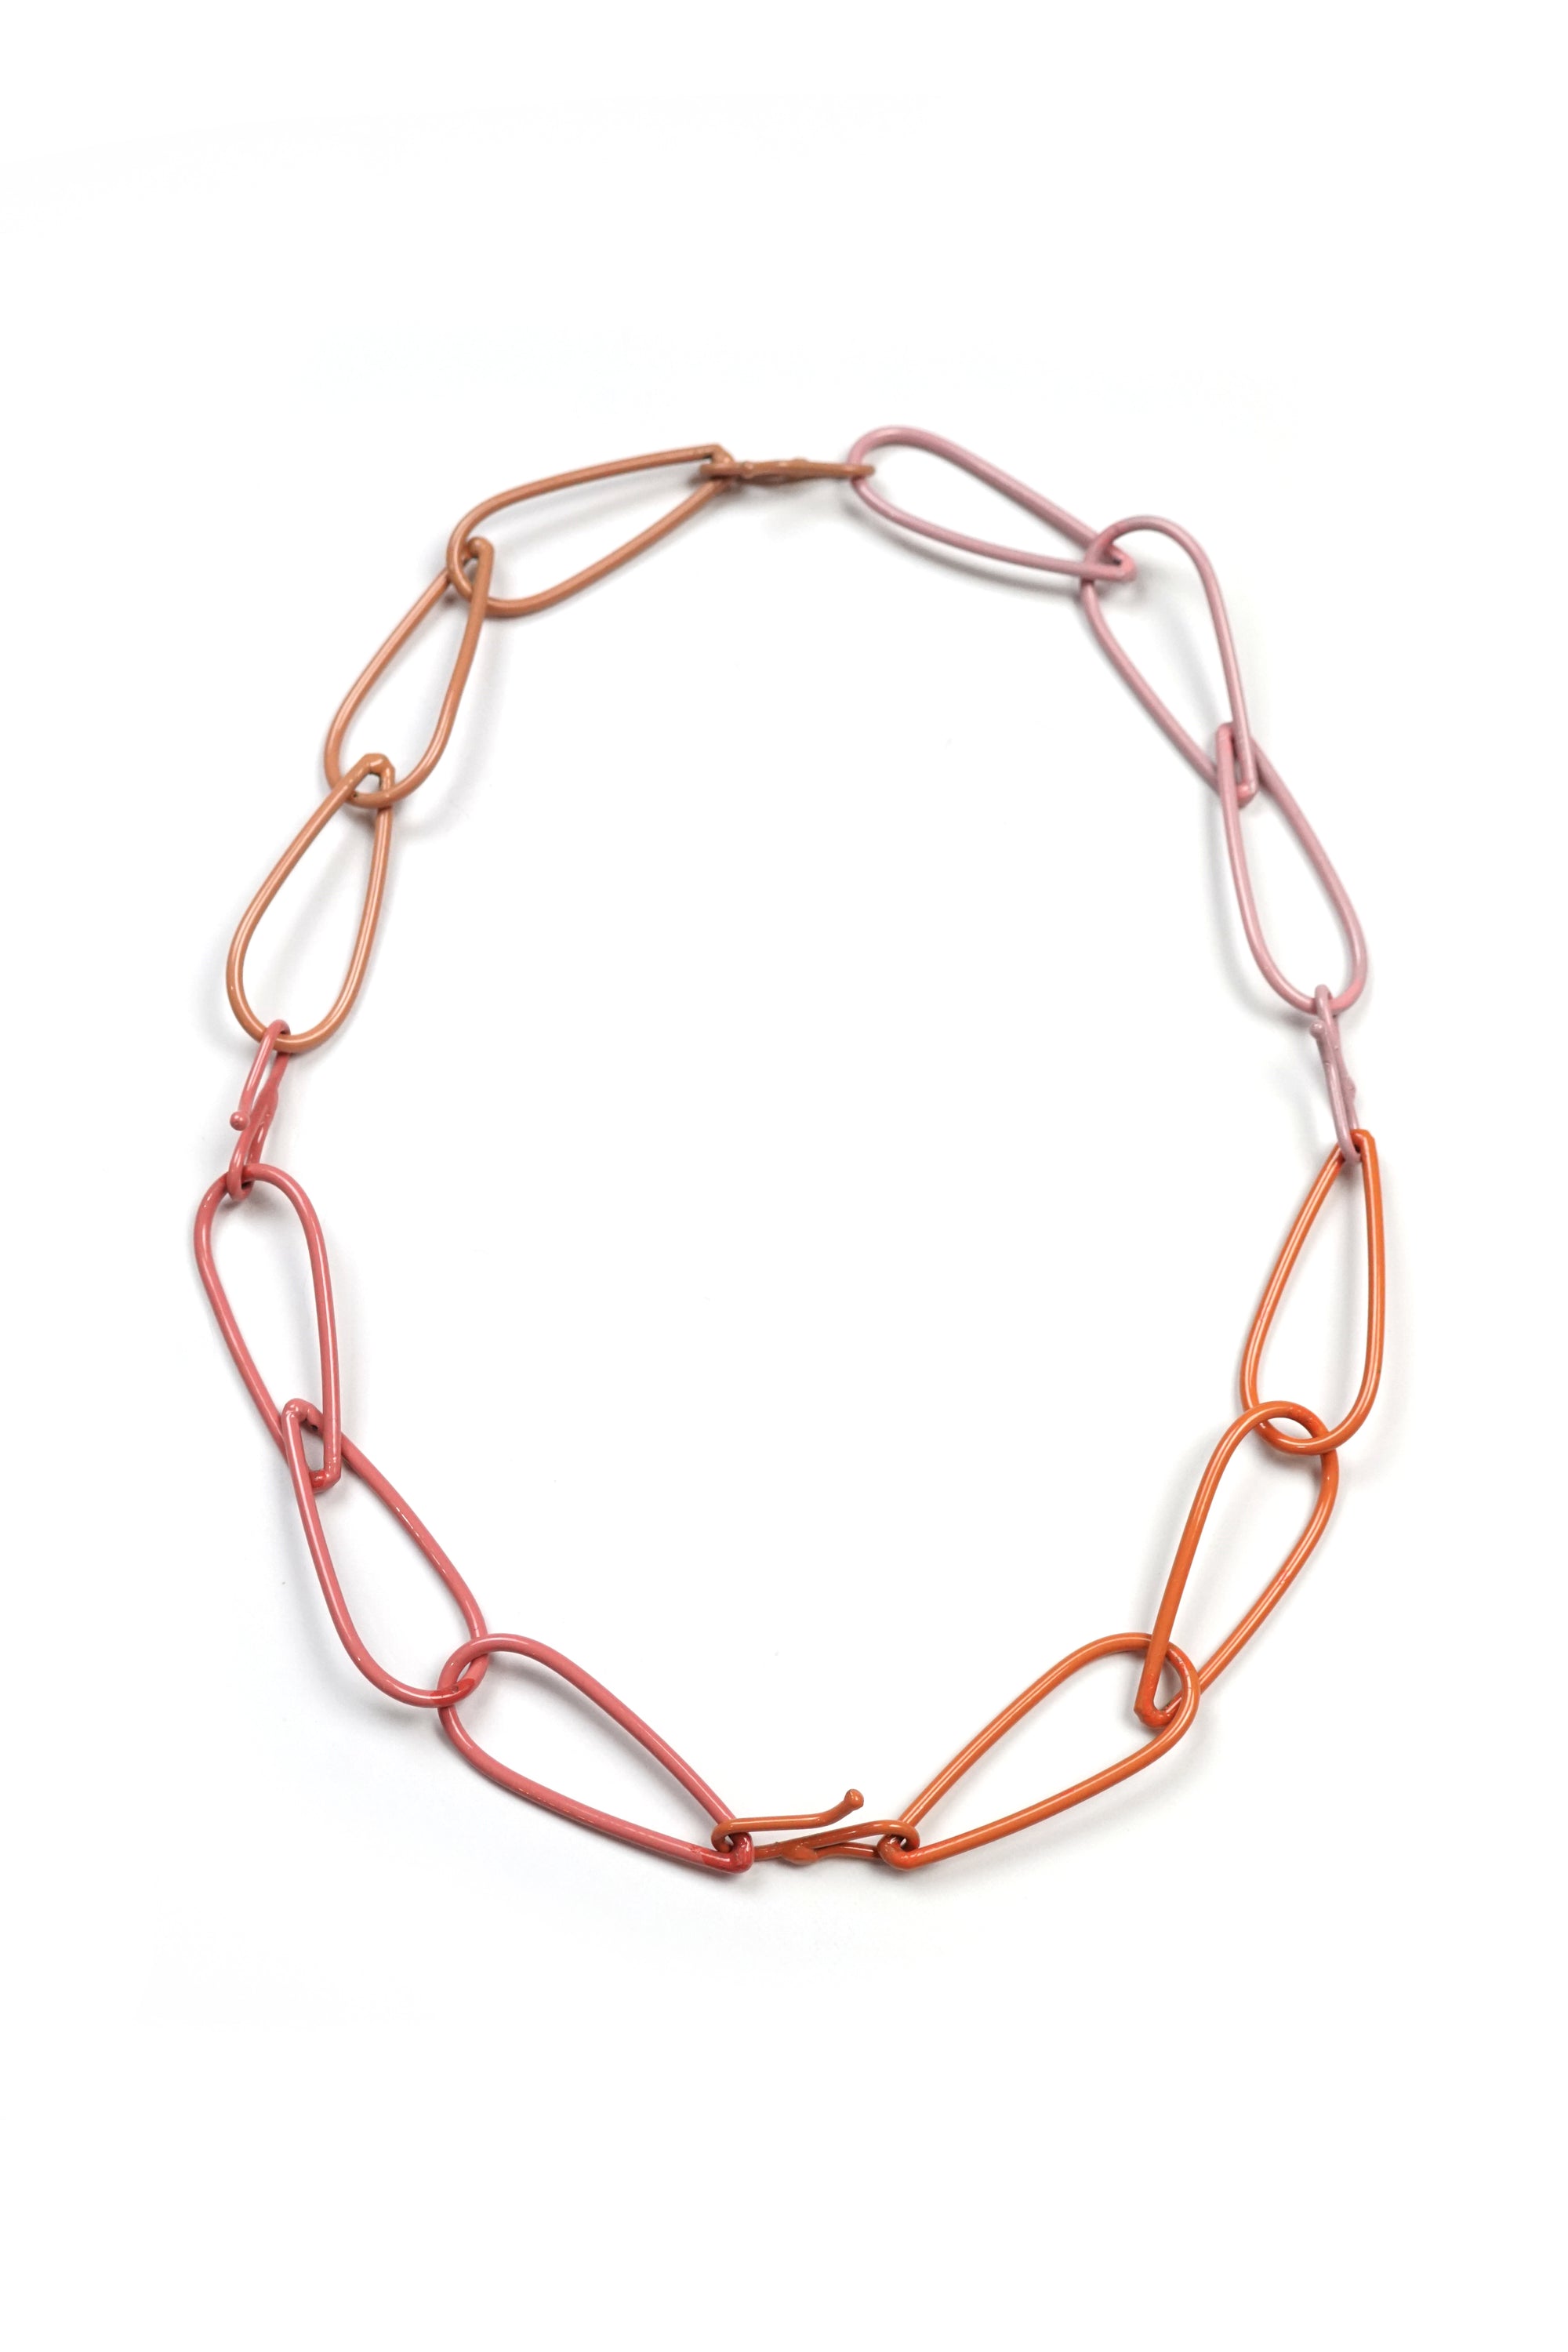 Modular Necklace in Dusty Rose, Desert Coral, Light Raspberry, and Bubble Gum